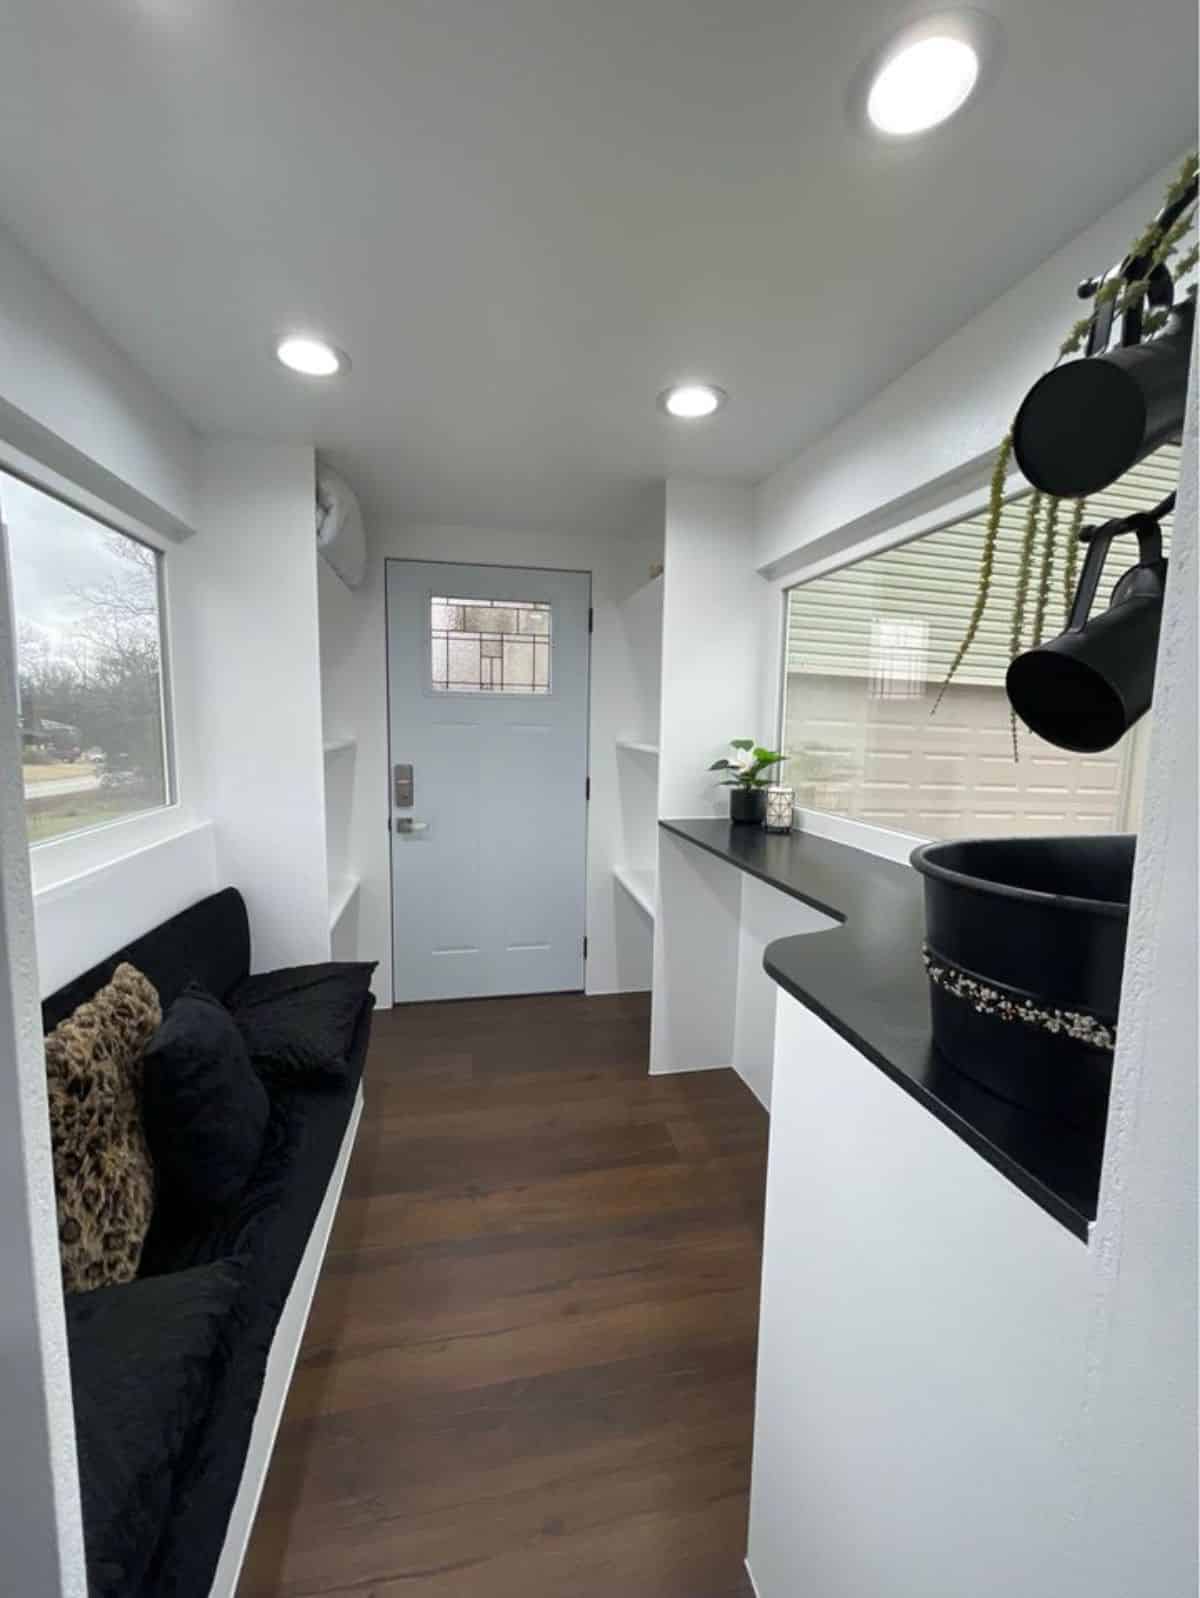 Full view interiors of mobile tiny house